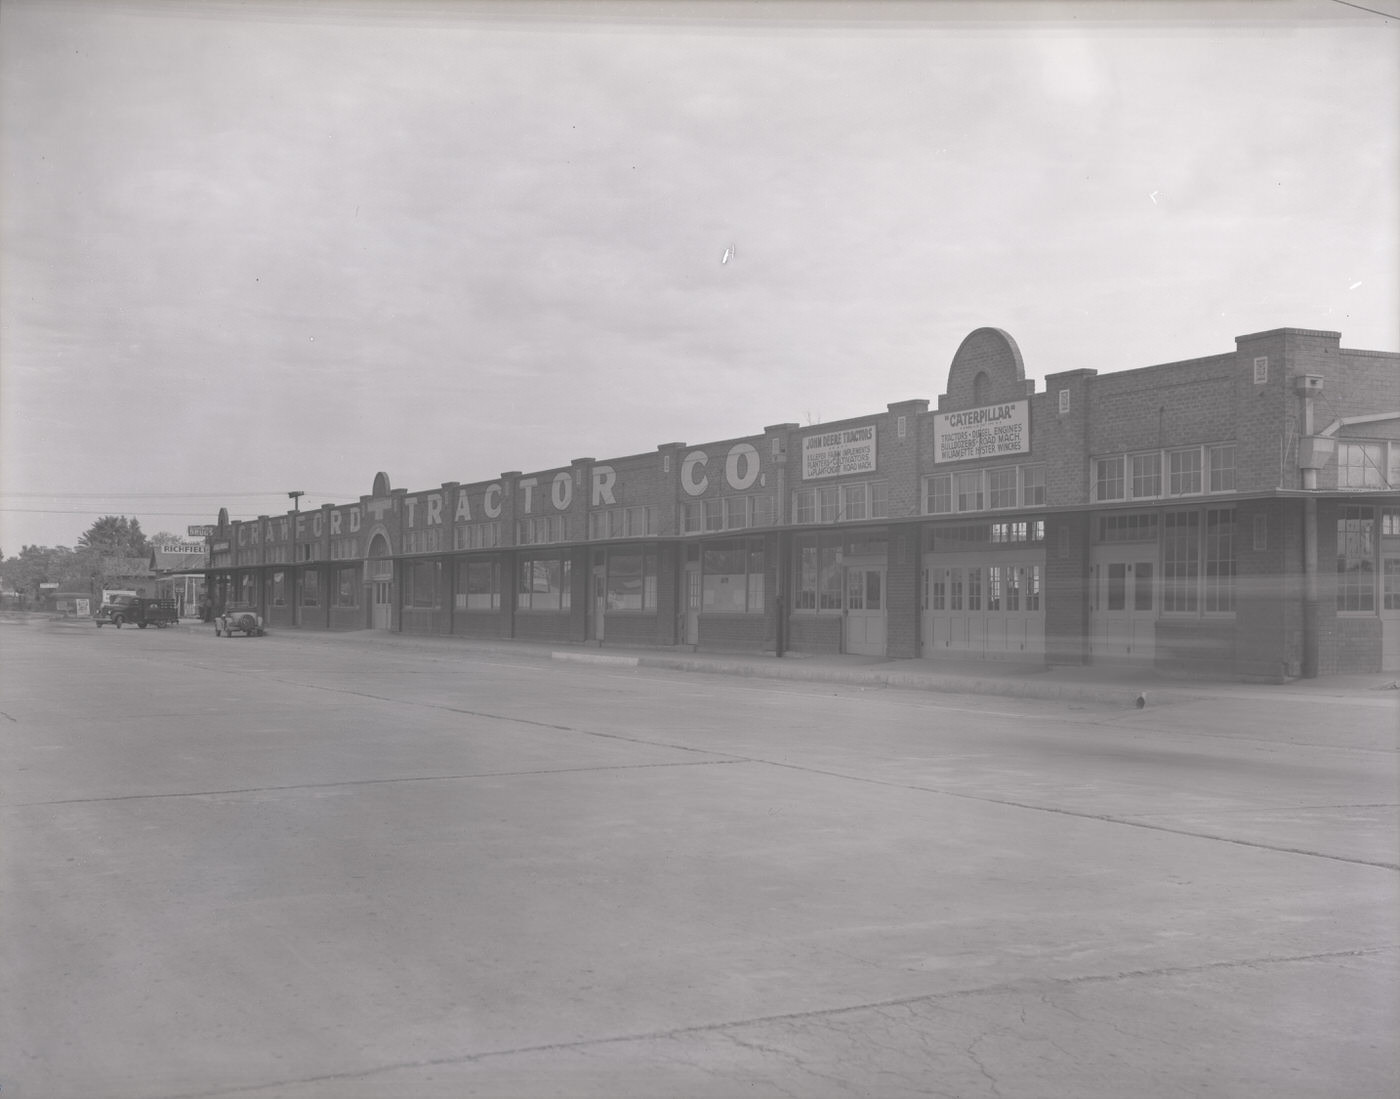 Crawford Tractor Company Building, 1930s